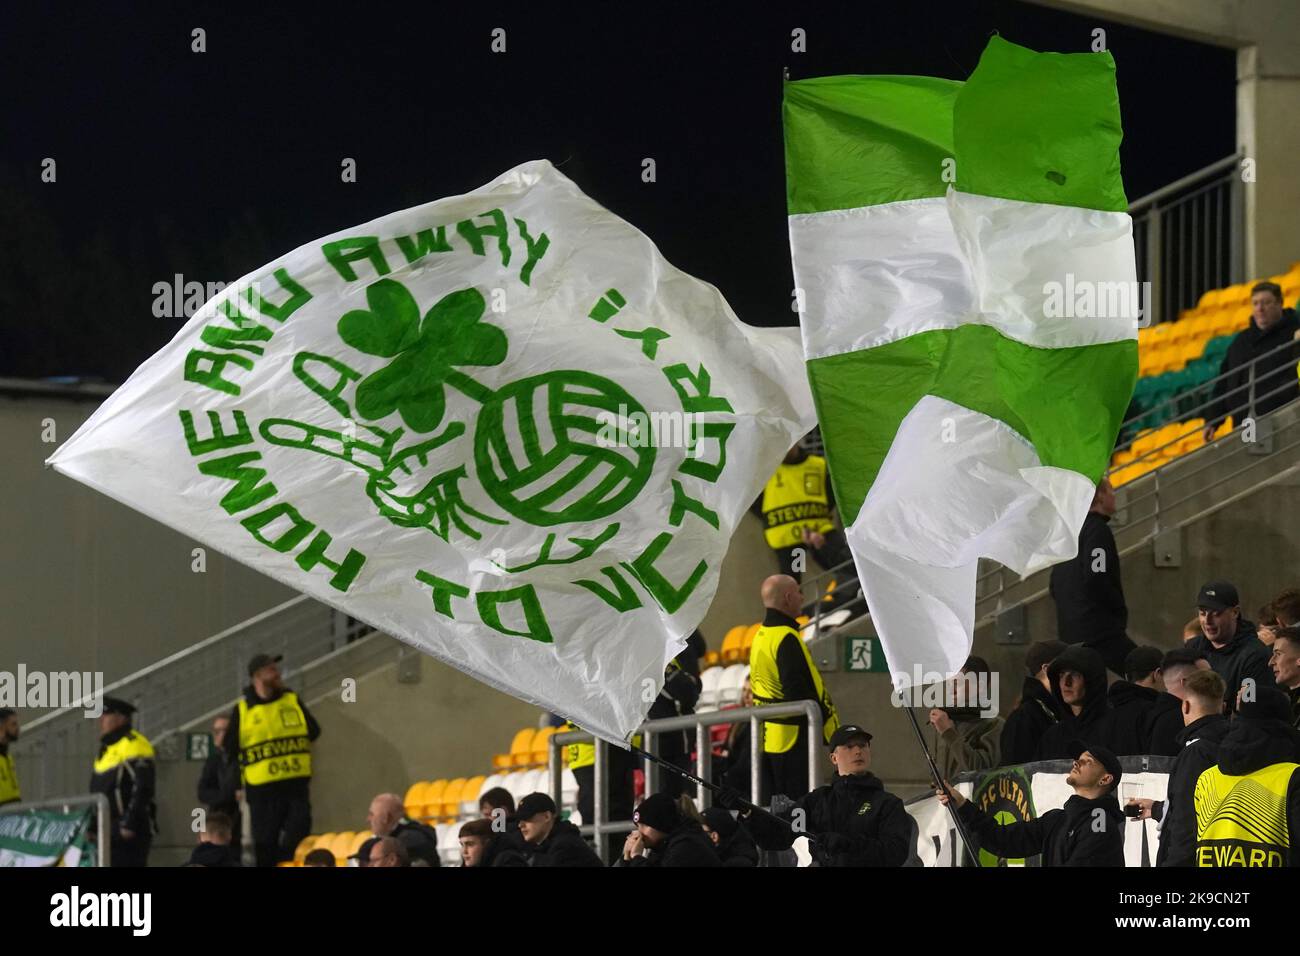 Tickets on sale for Ferencvaros - Shamrock Rovers - Huge Conference League  tie in Tallaght